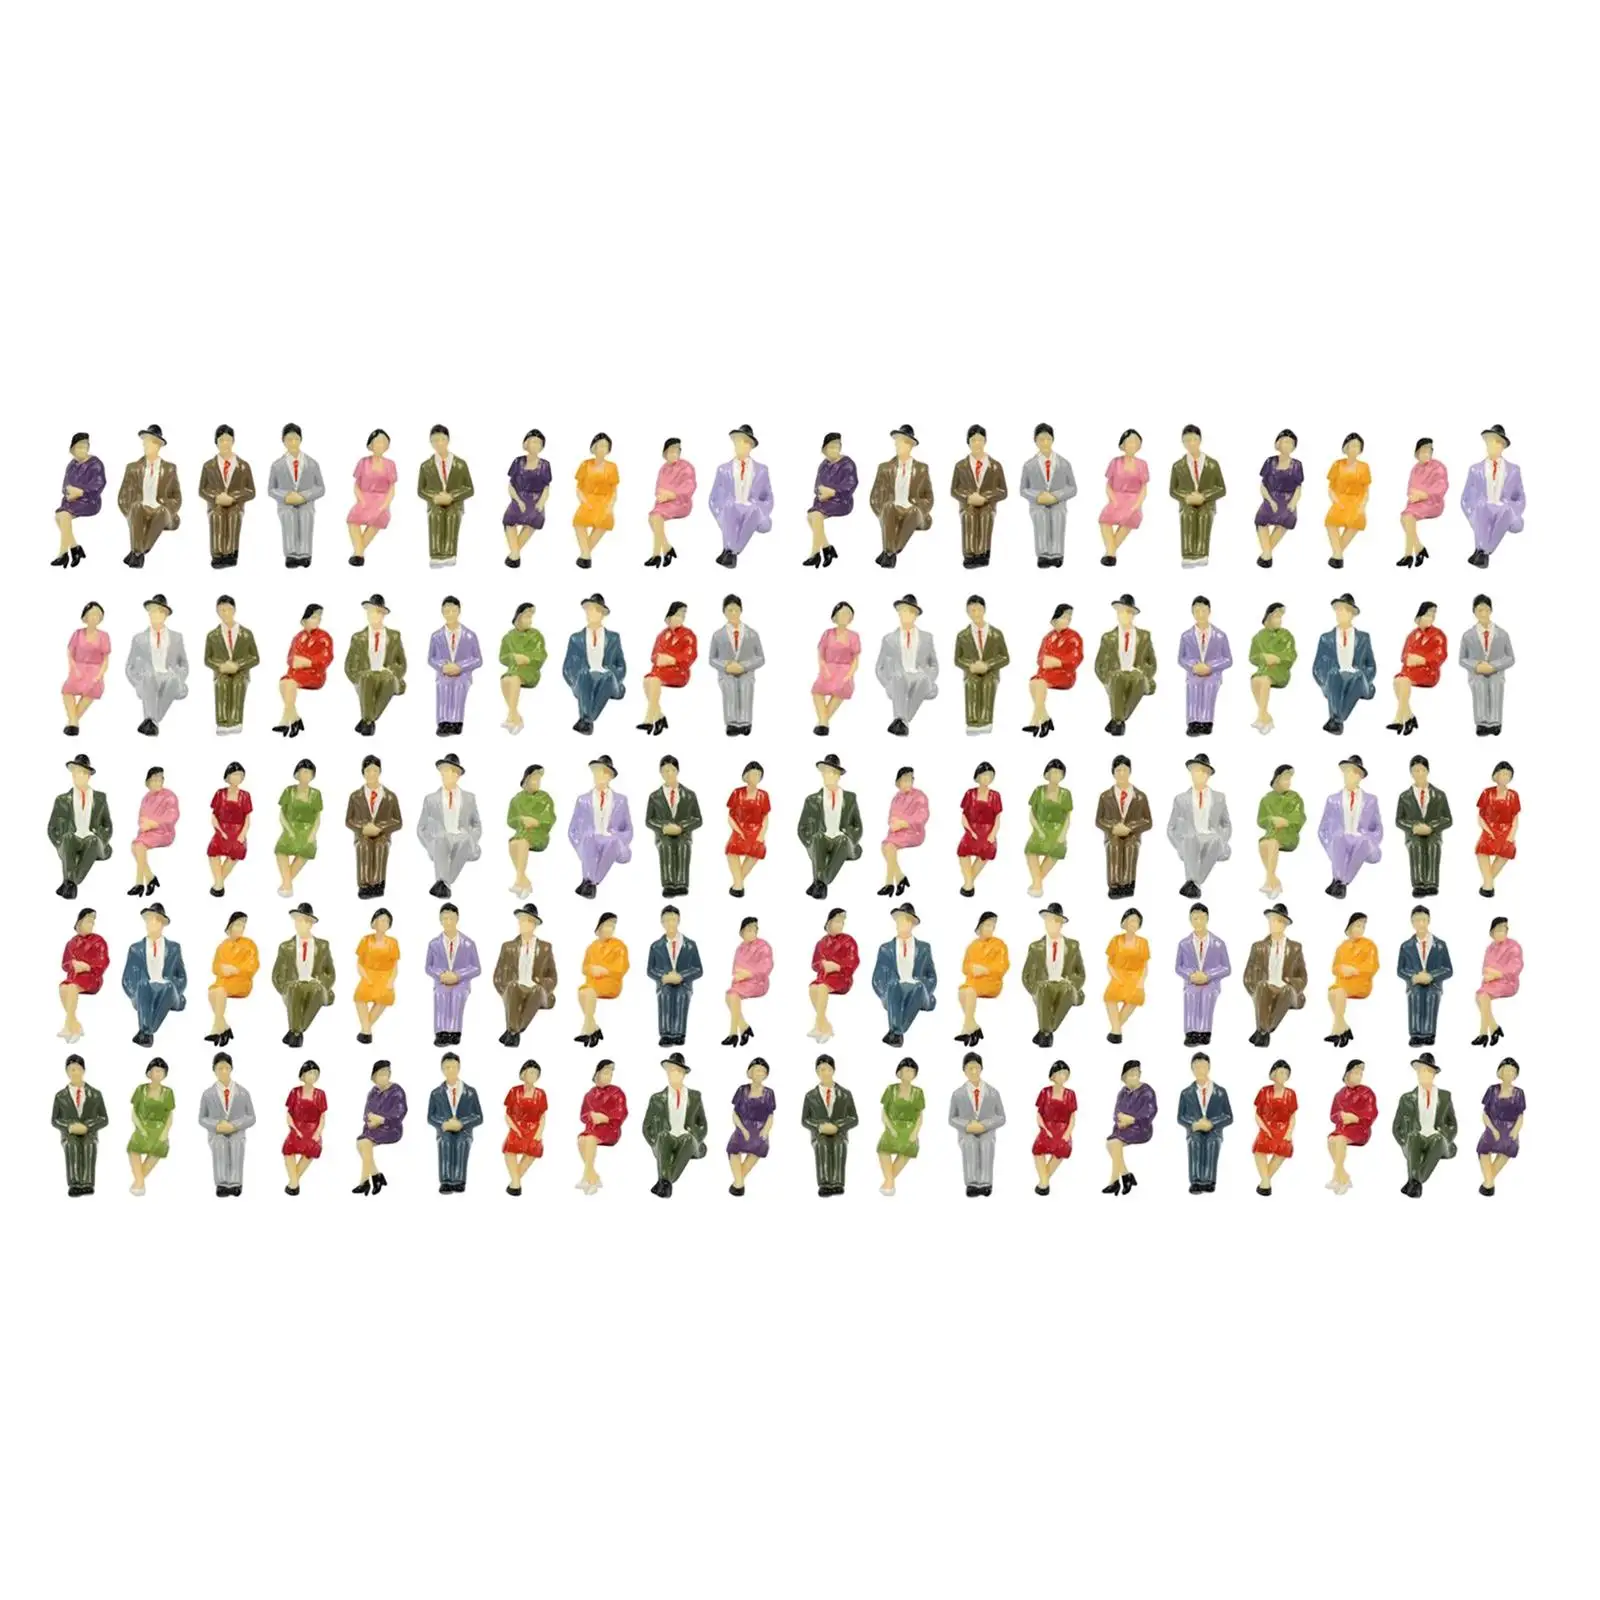 100 Pieces 1/30 Scale Small Figure Handpainted Playset Miniature People for Model Train Station Platform Layout Accessories